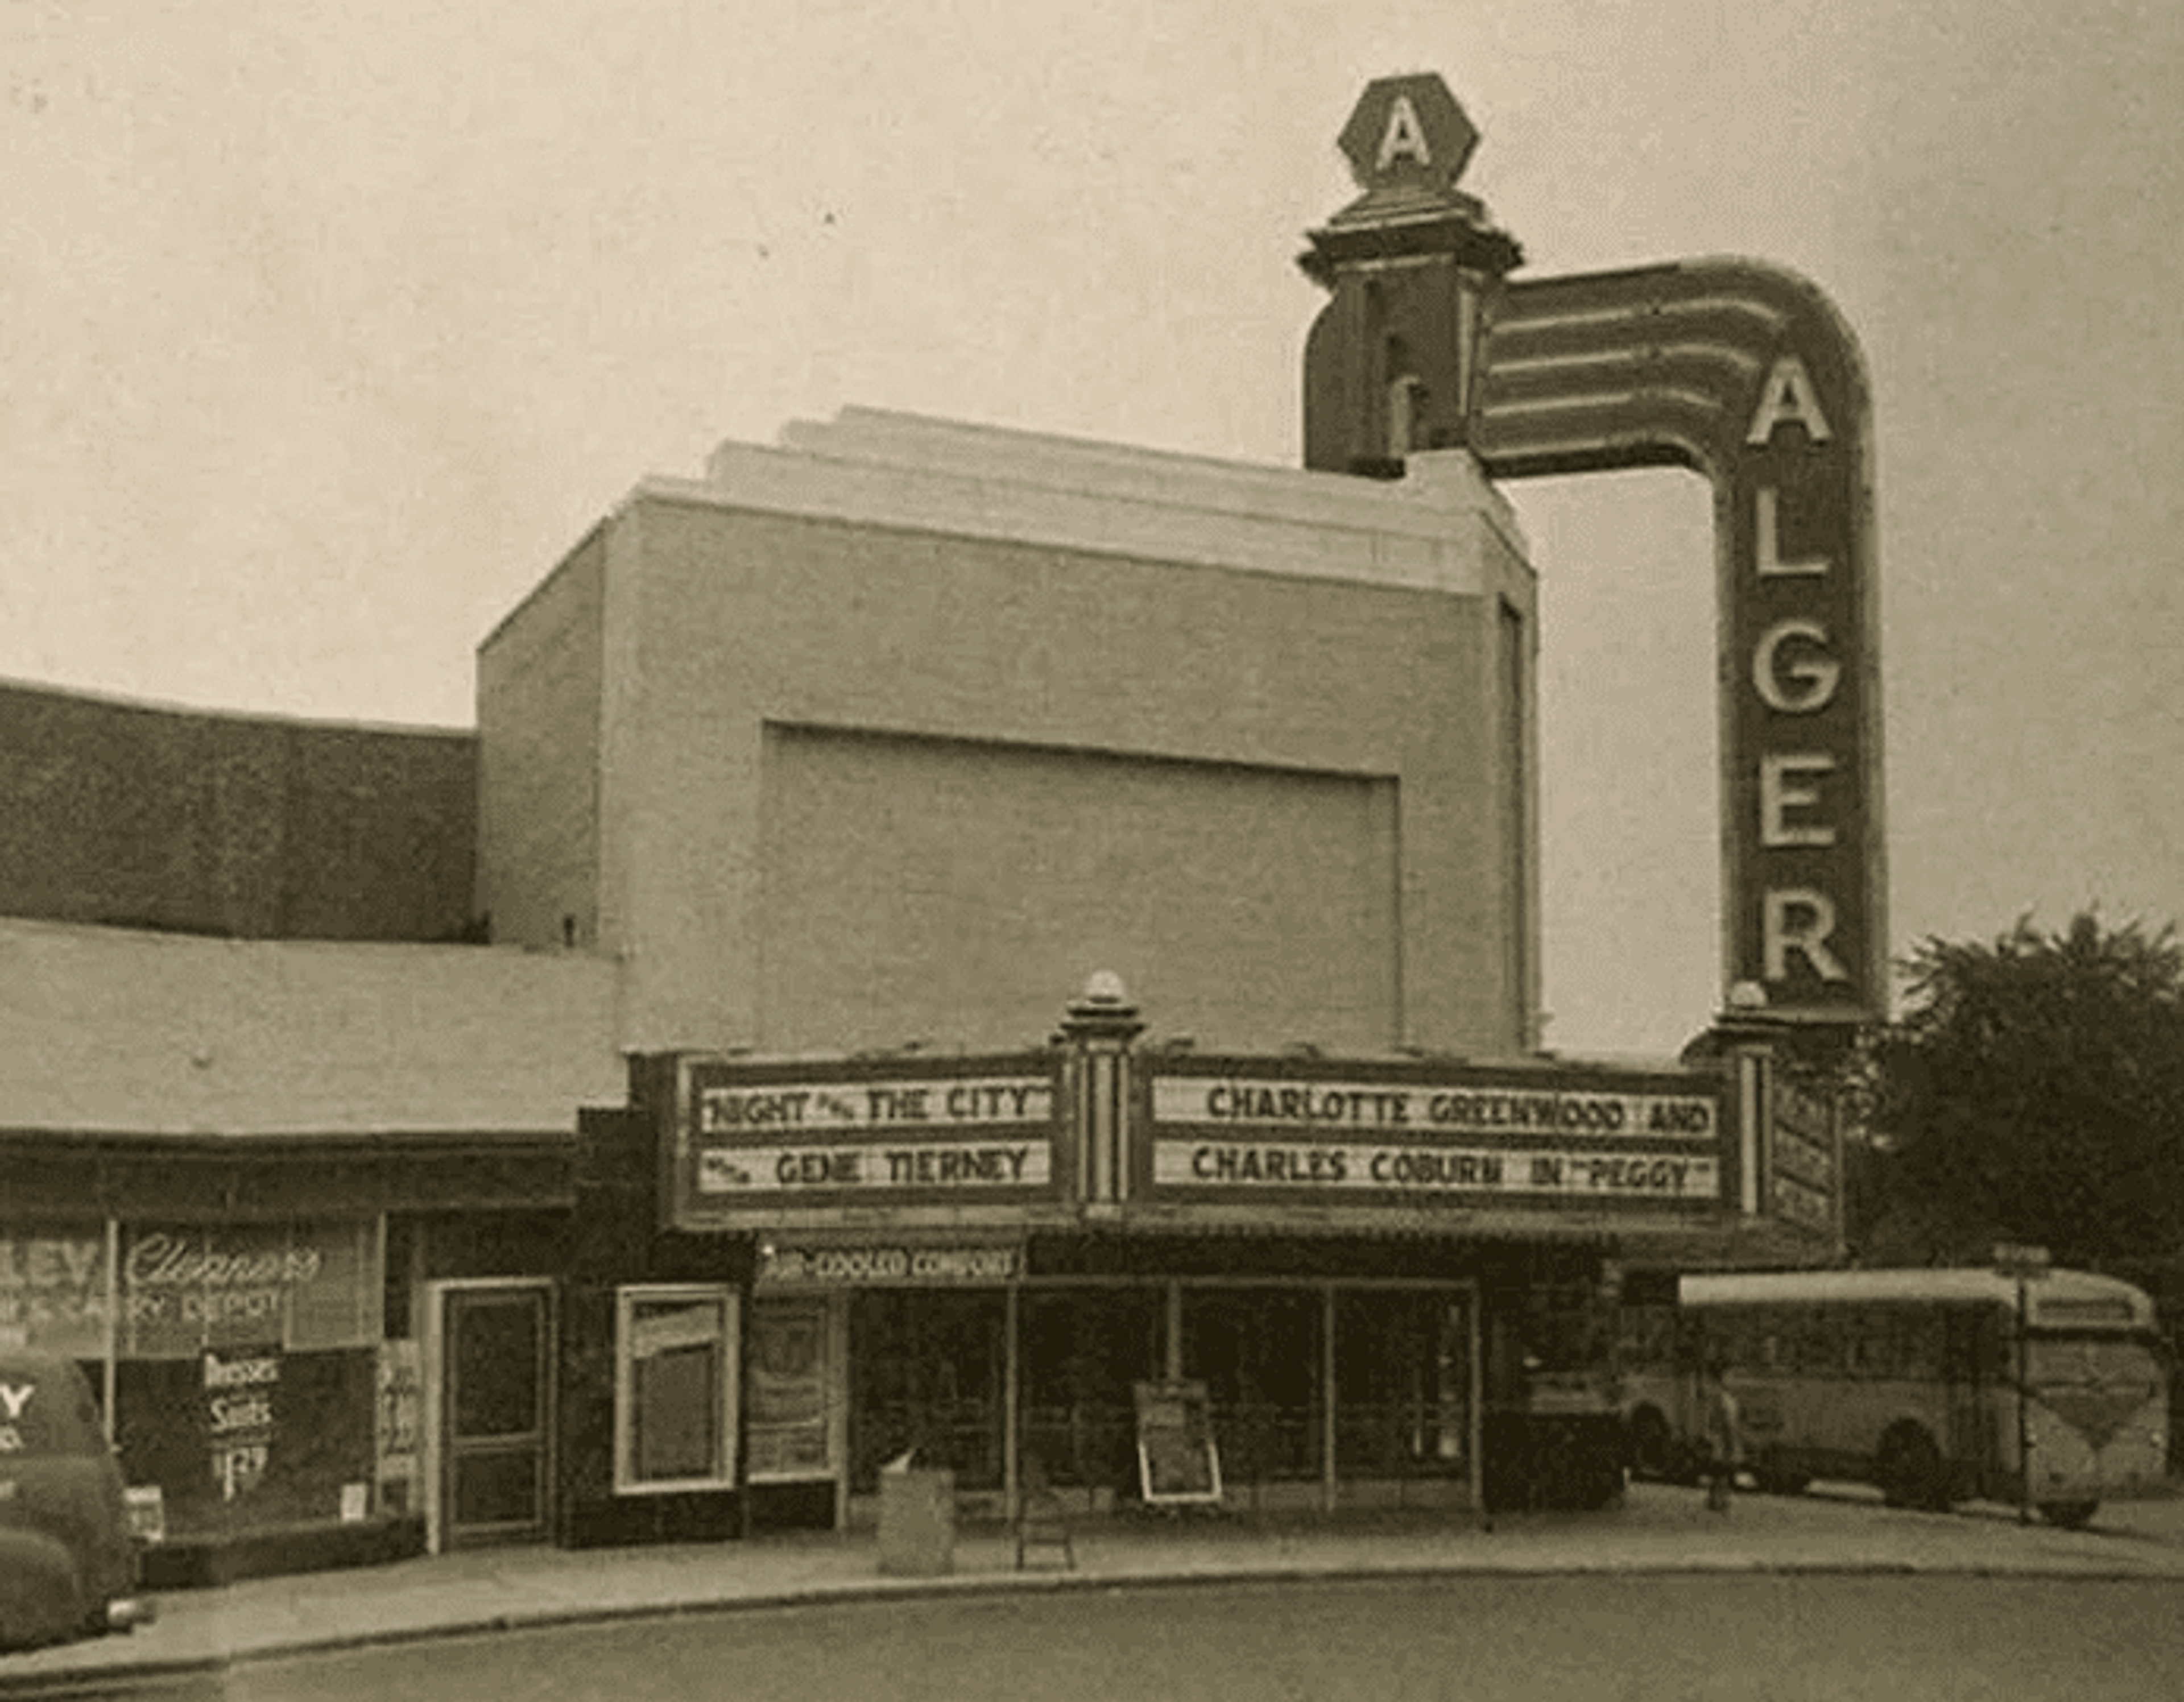 The Alger Theater in Detroit became a convenient and affordable place for eastside Detroiters to go to watch B-movies in the late 1970s and early 1980s.